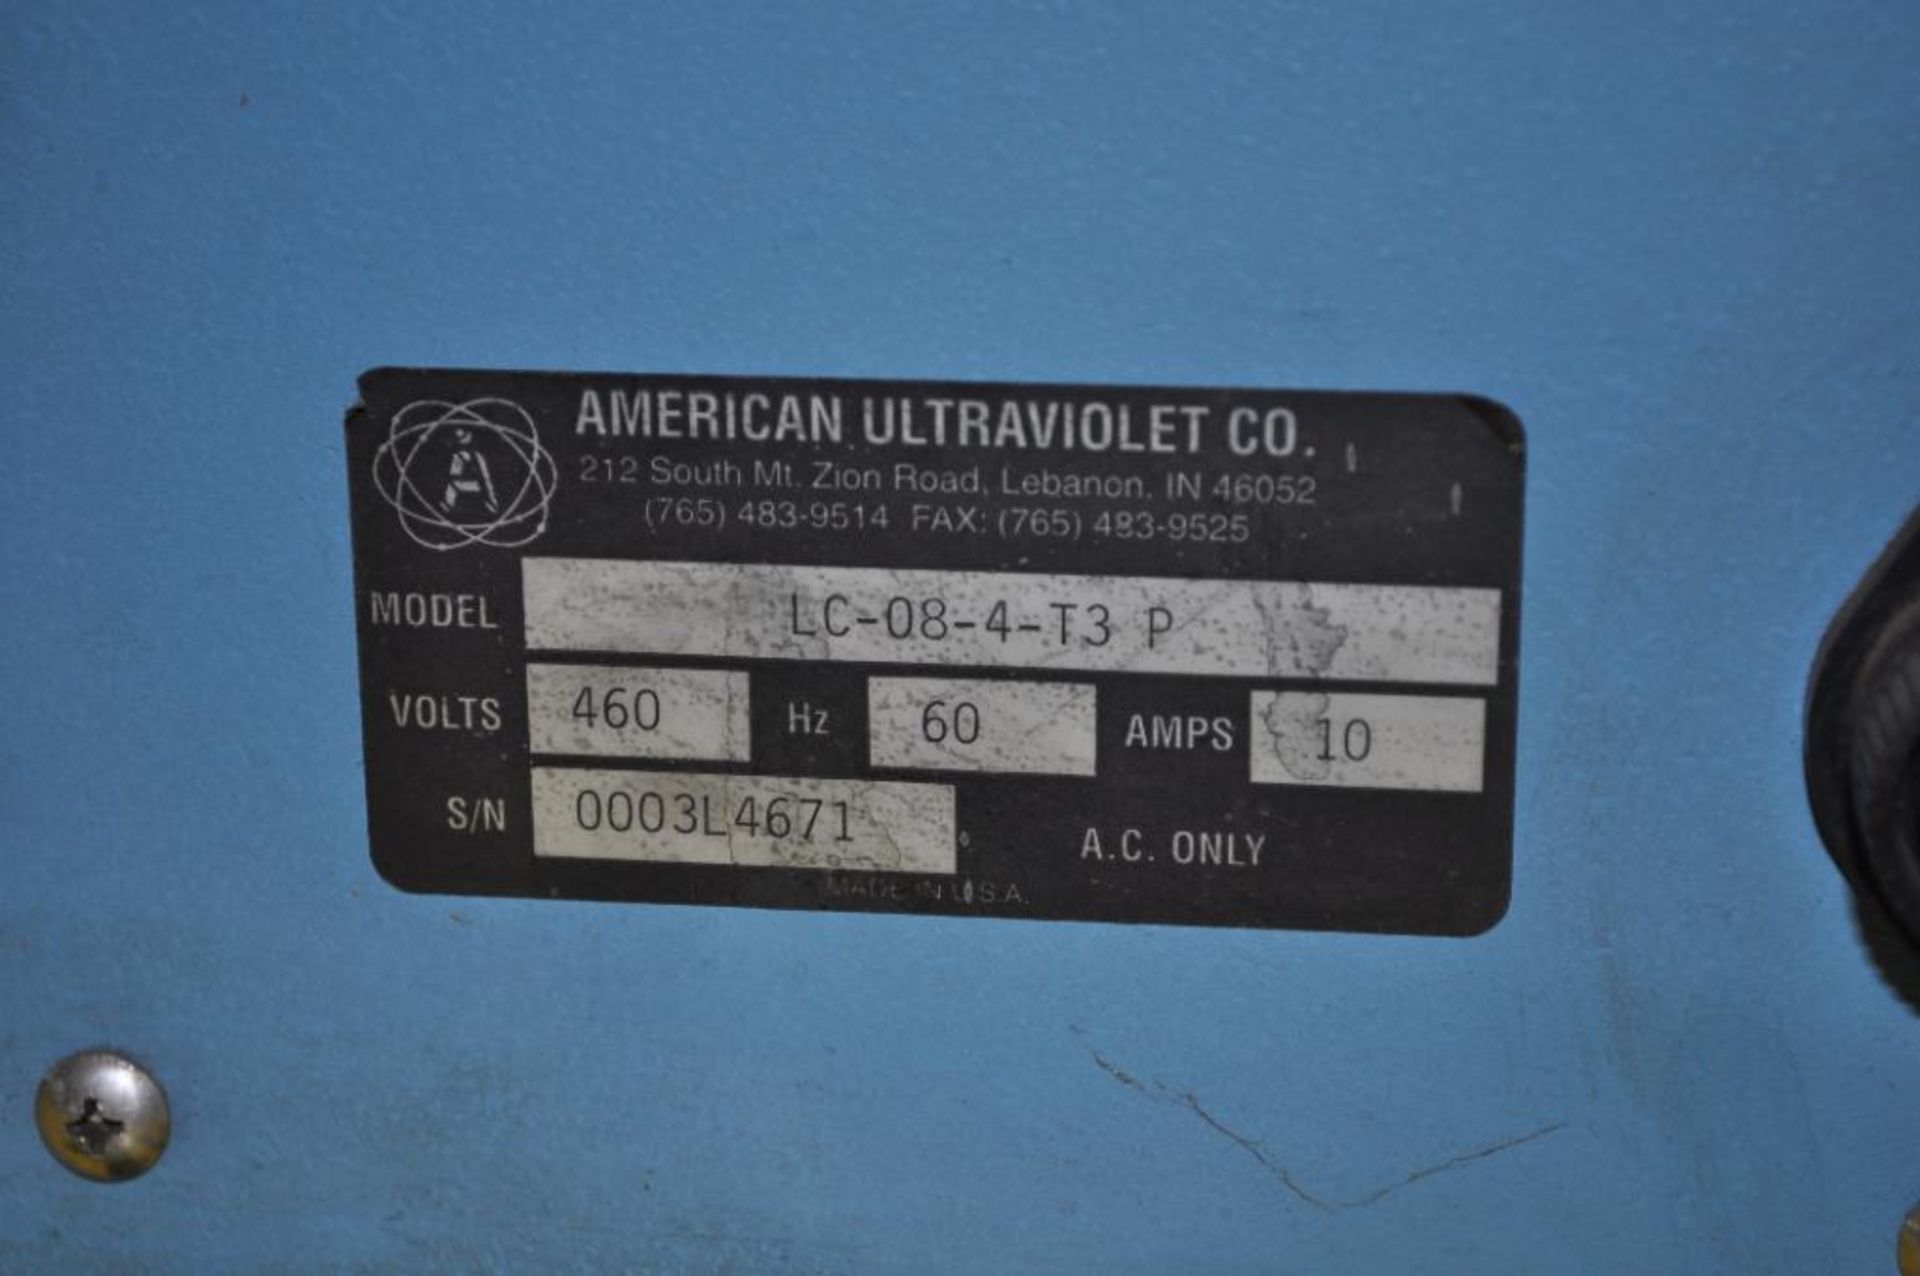 AMERICAN ULTRAVIOLET COMPANY UV CURING CONVEYOR, MODEL: LC-08-4-T3 P, 460 V, 10 AMPS - Image 5 of 6